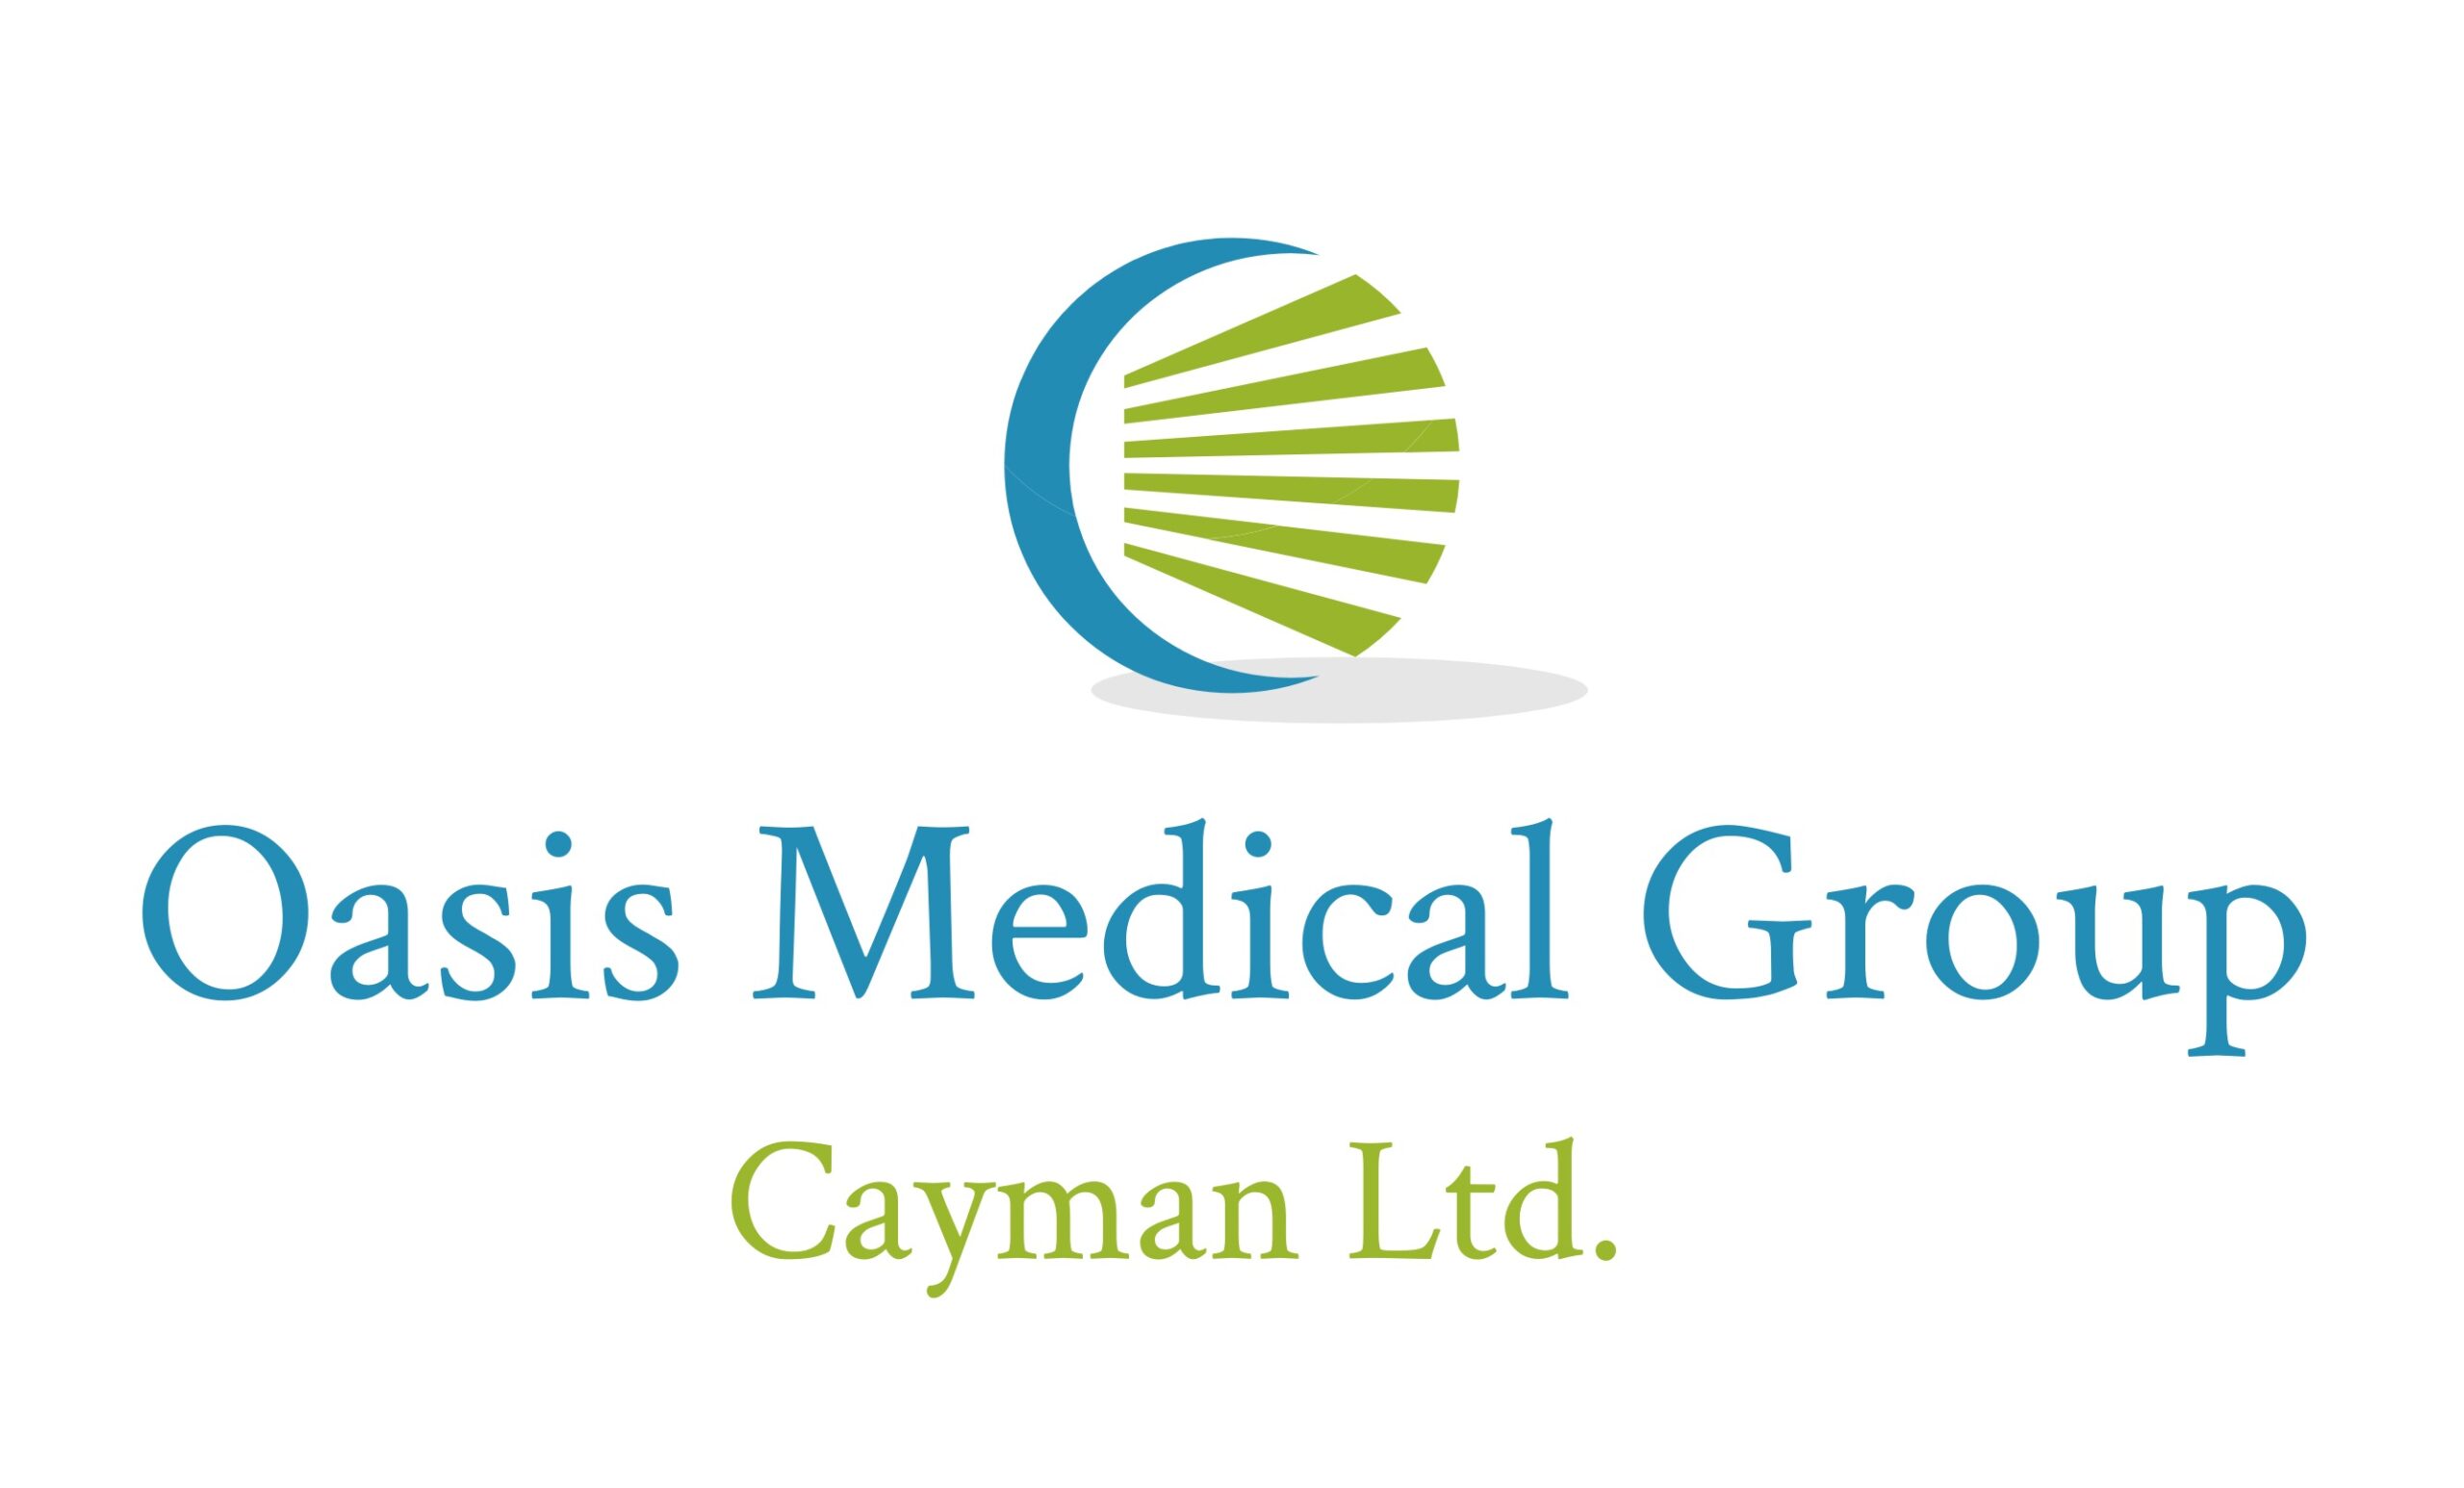 Oasis Medical Group|About